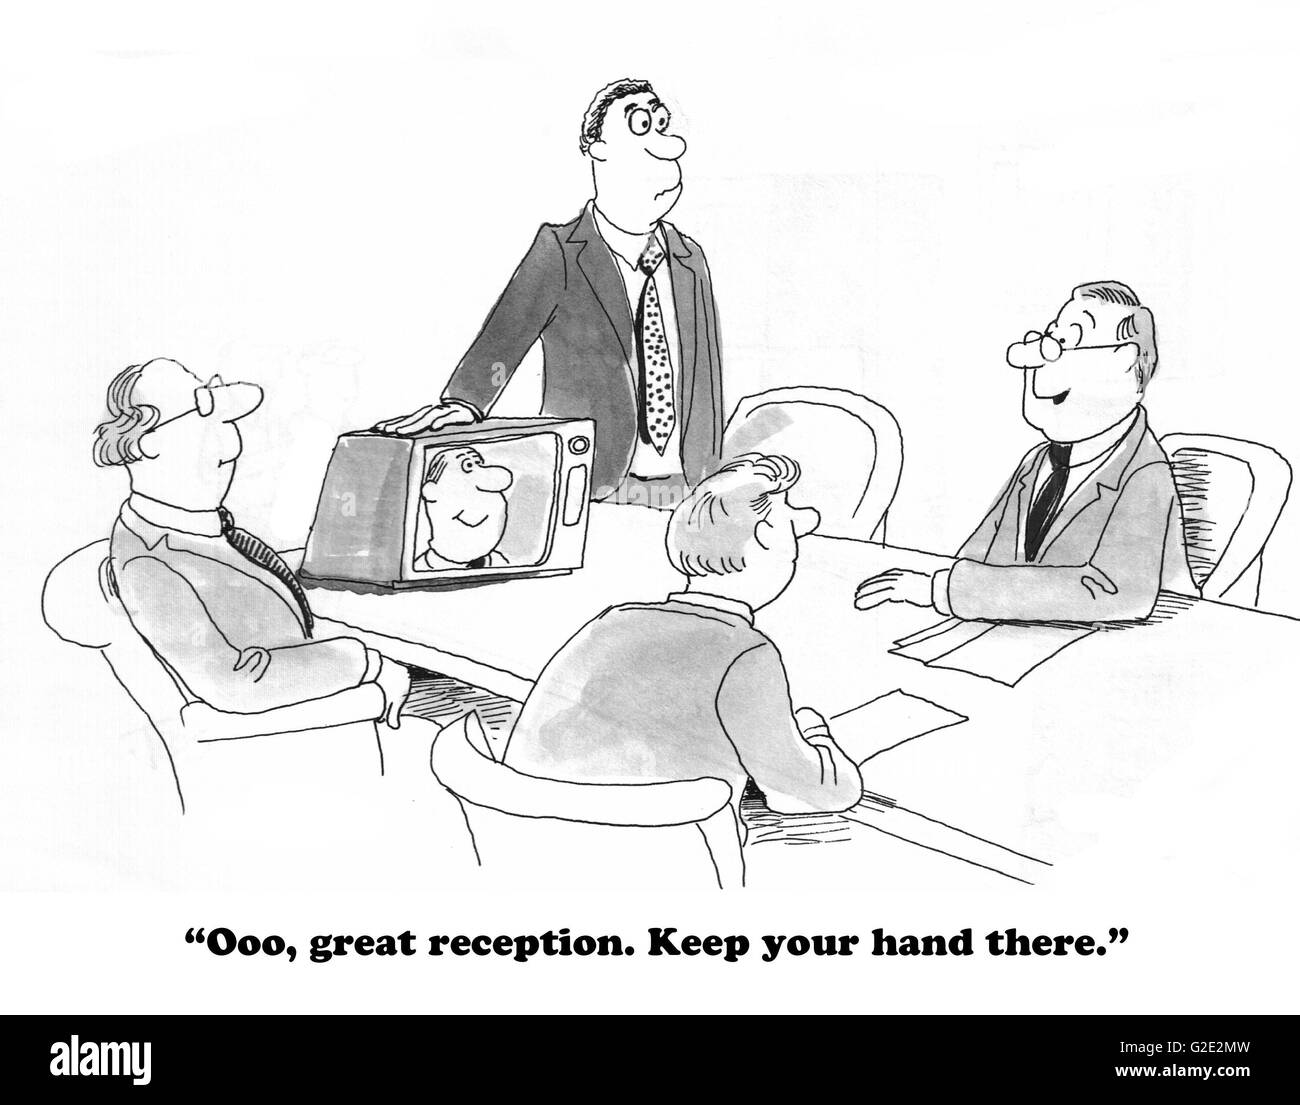 Business cartoon about boss treating coworker as a flunky, asking him to hold his hand on monitor to maintain clear reception. Stock Photo